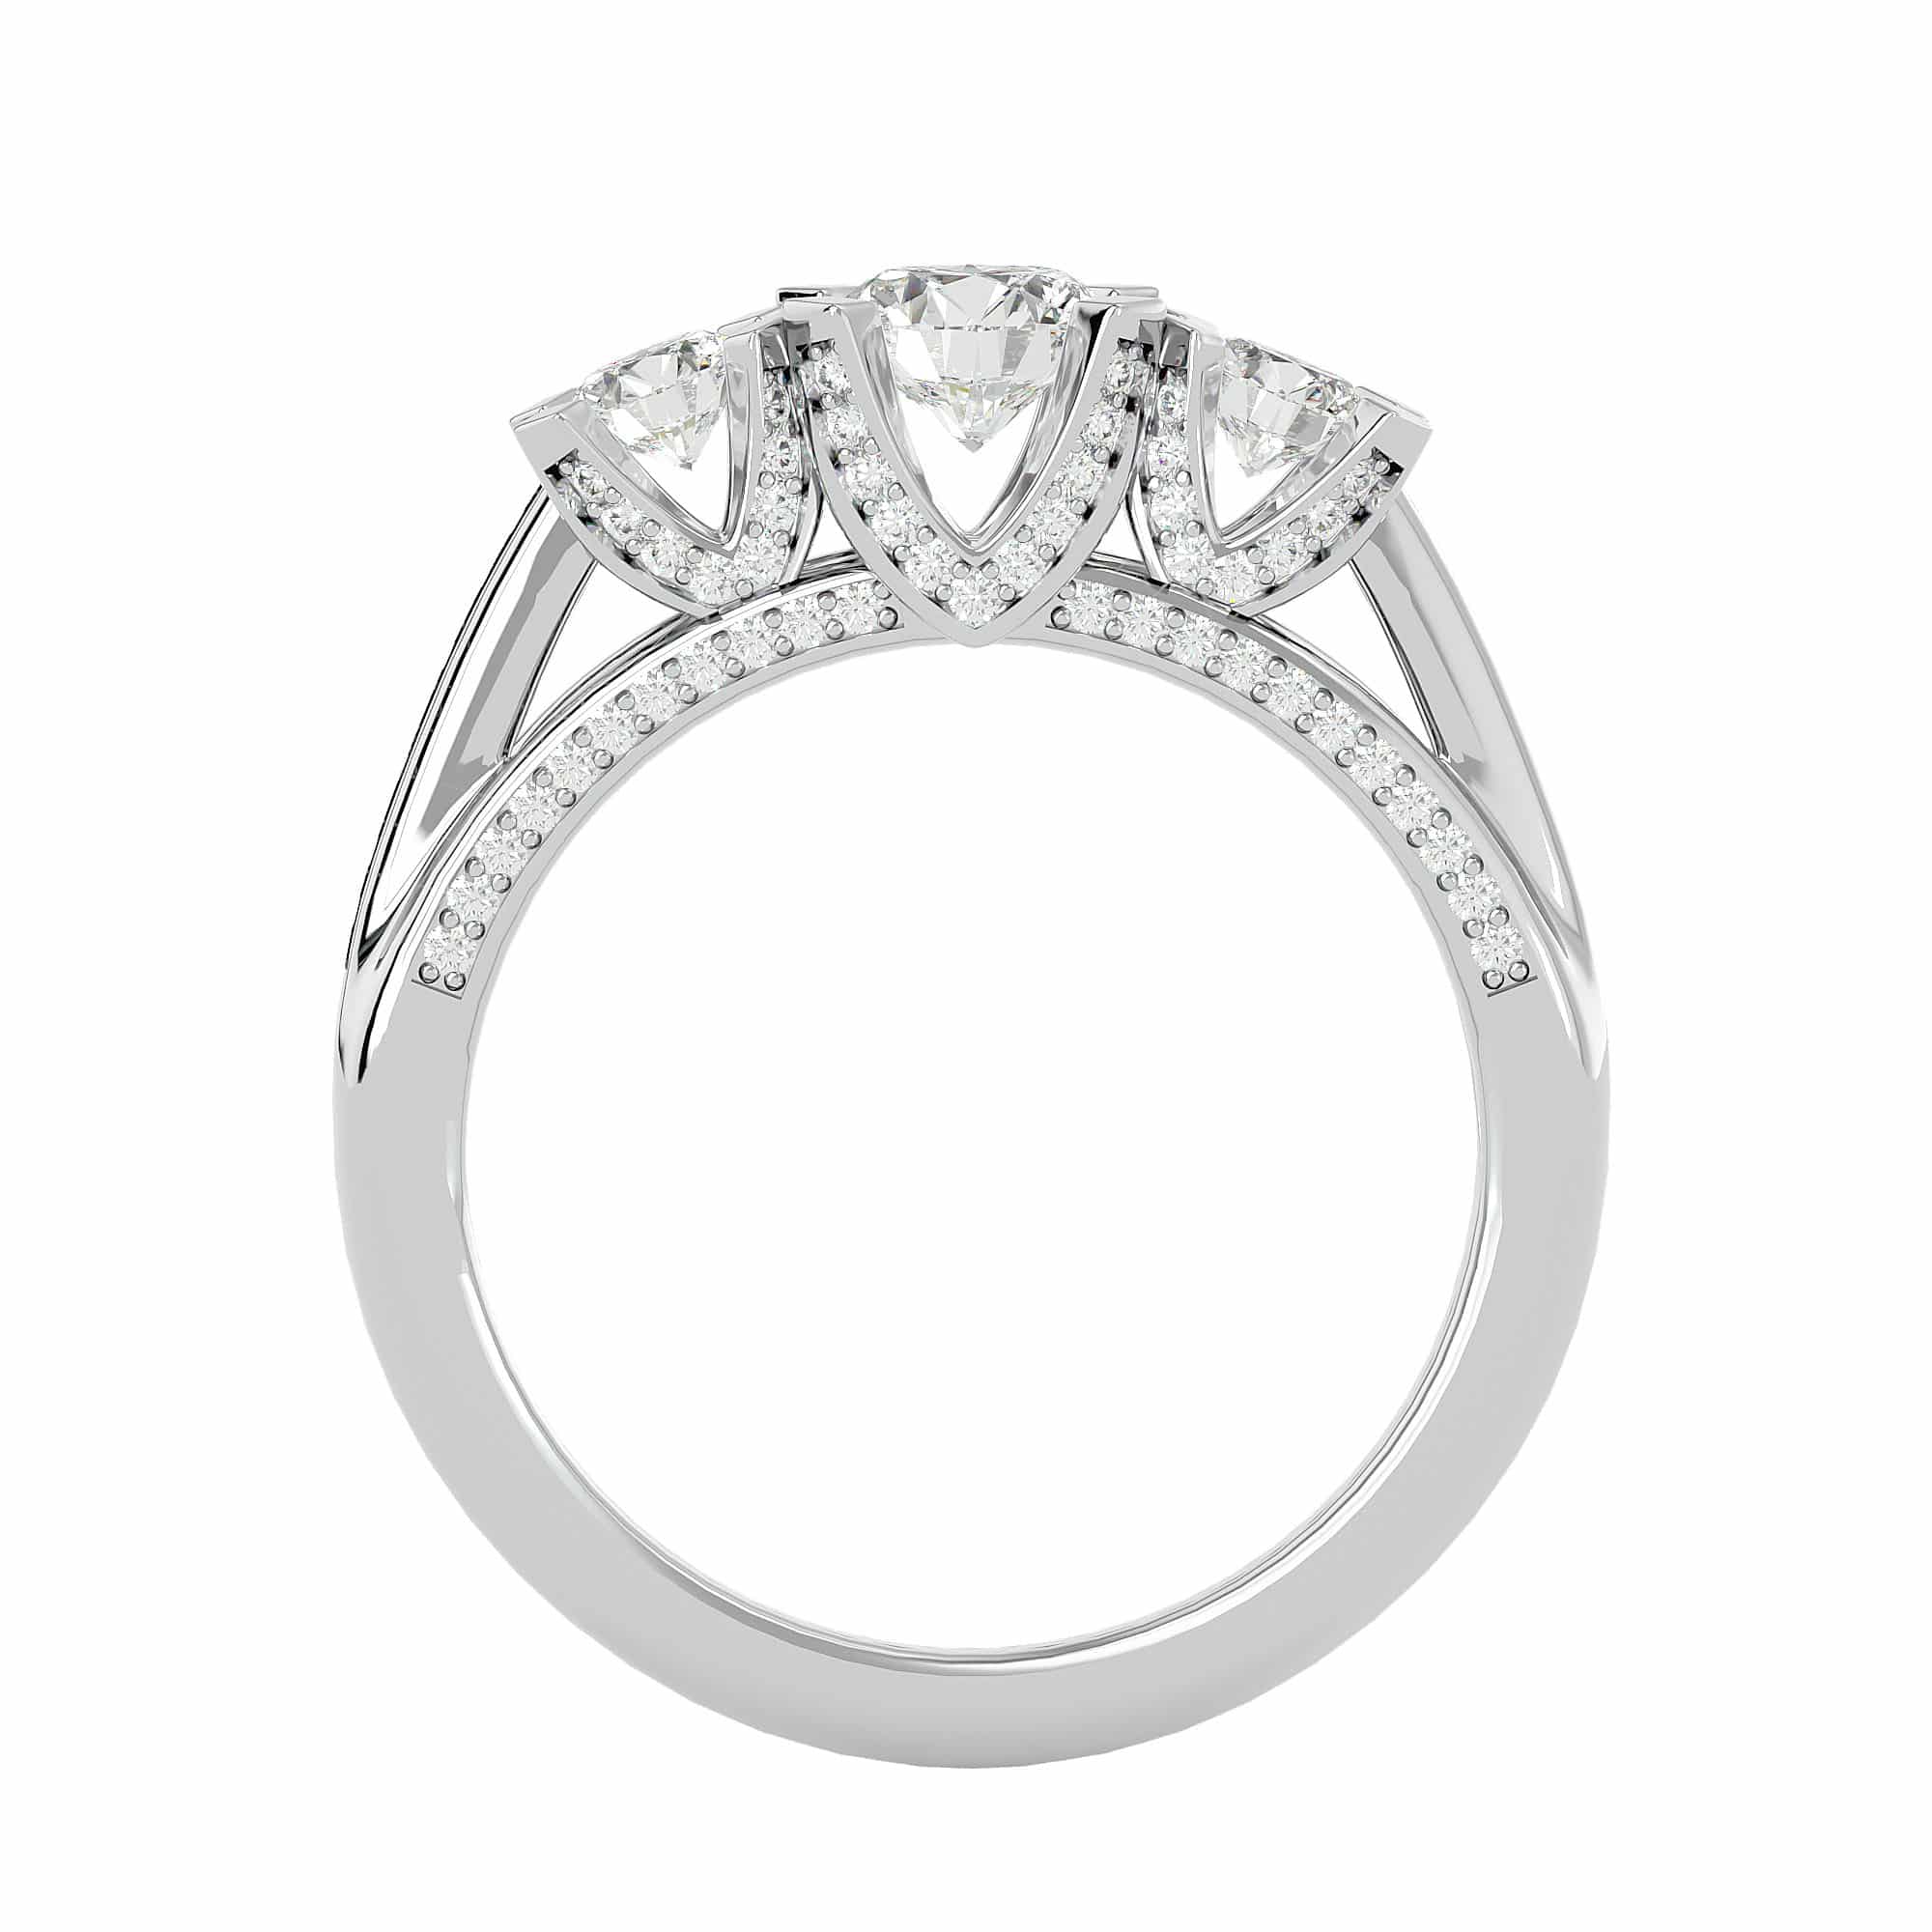 Lucy Three Stone Engagement Ring V Prongs Setting